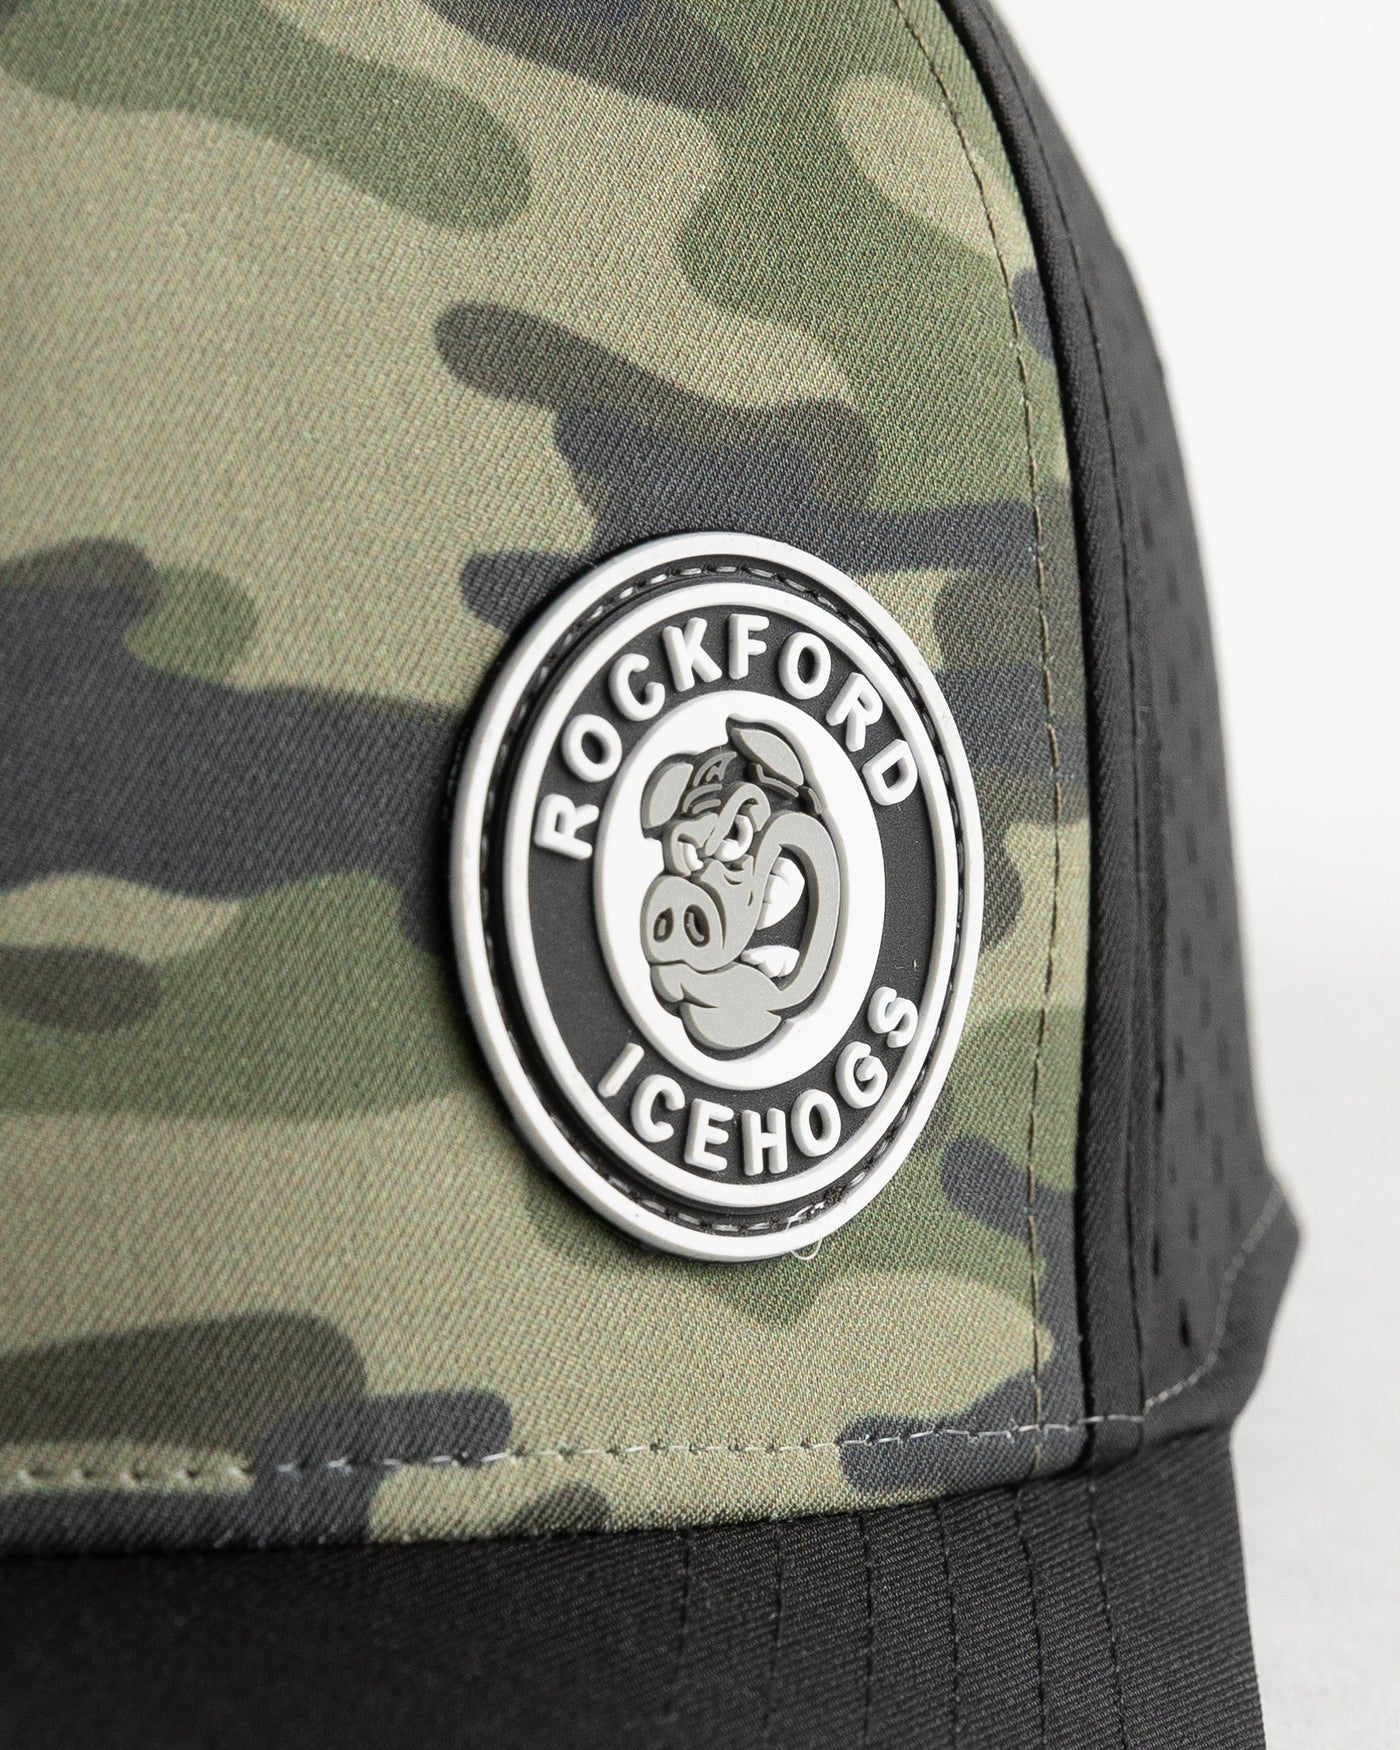 black and camo Rockford IceHogs adjustable cap - detail lay flat